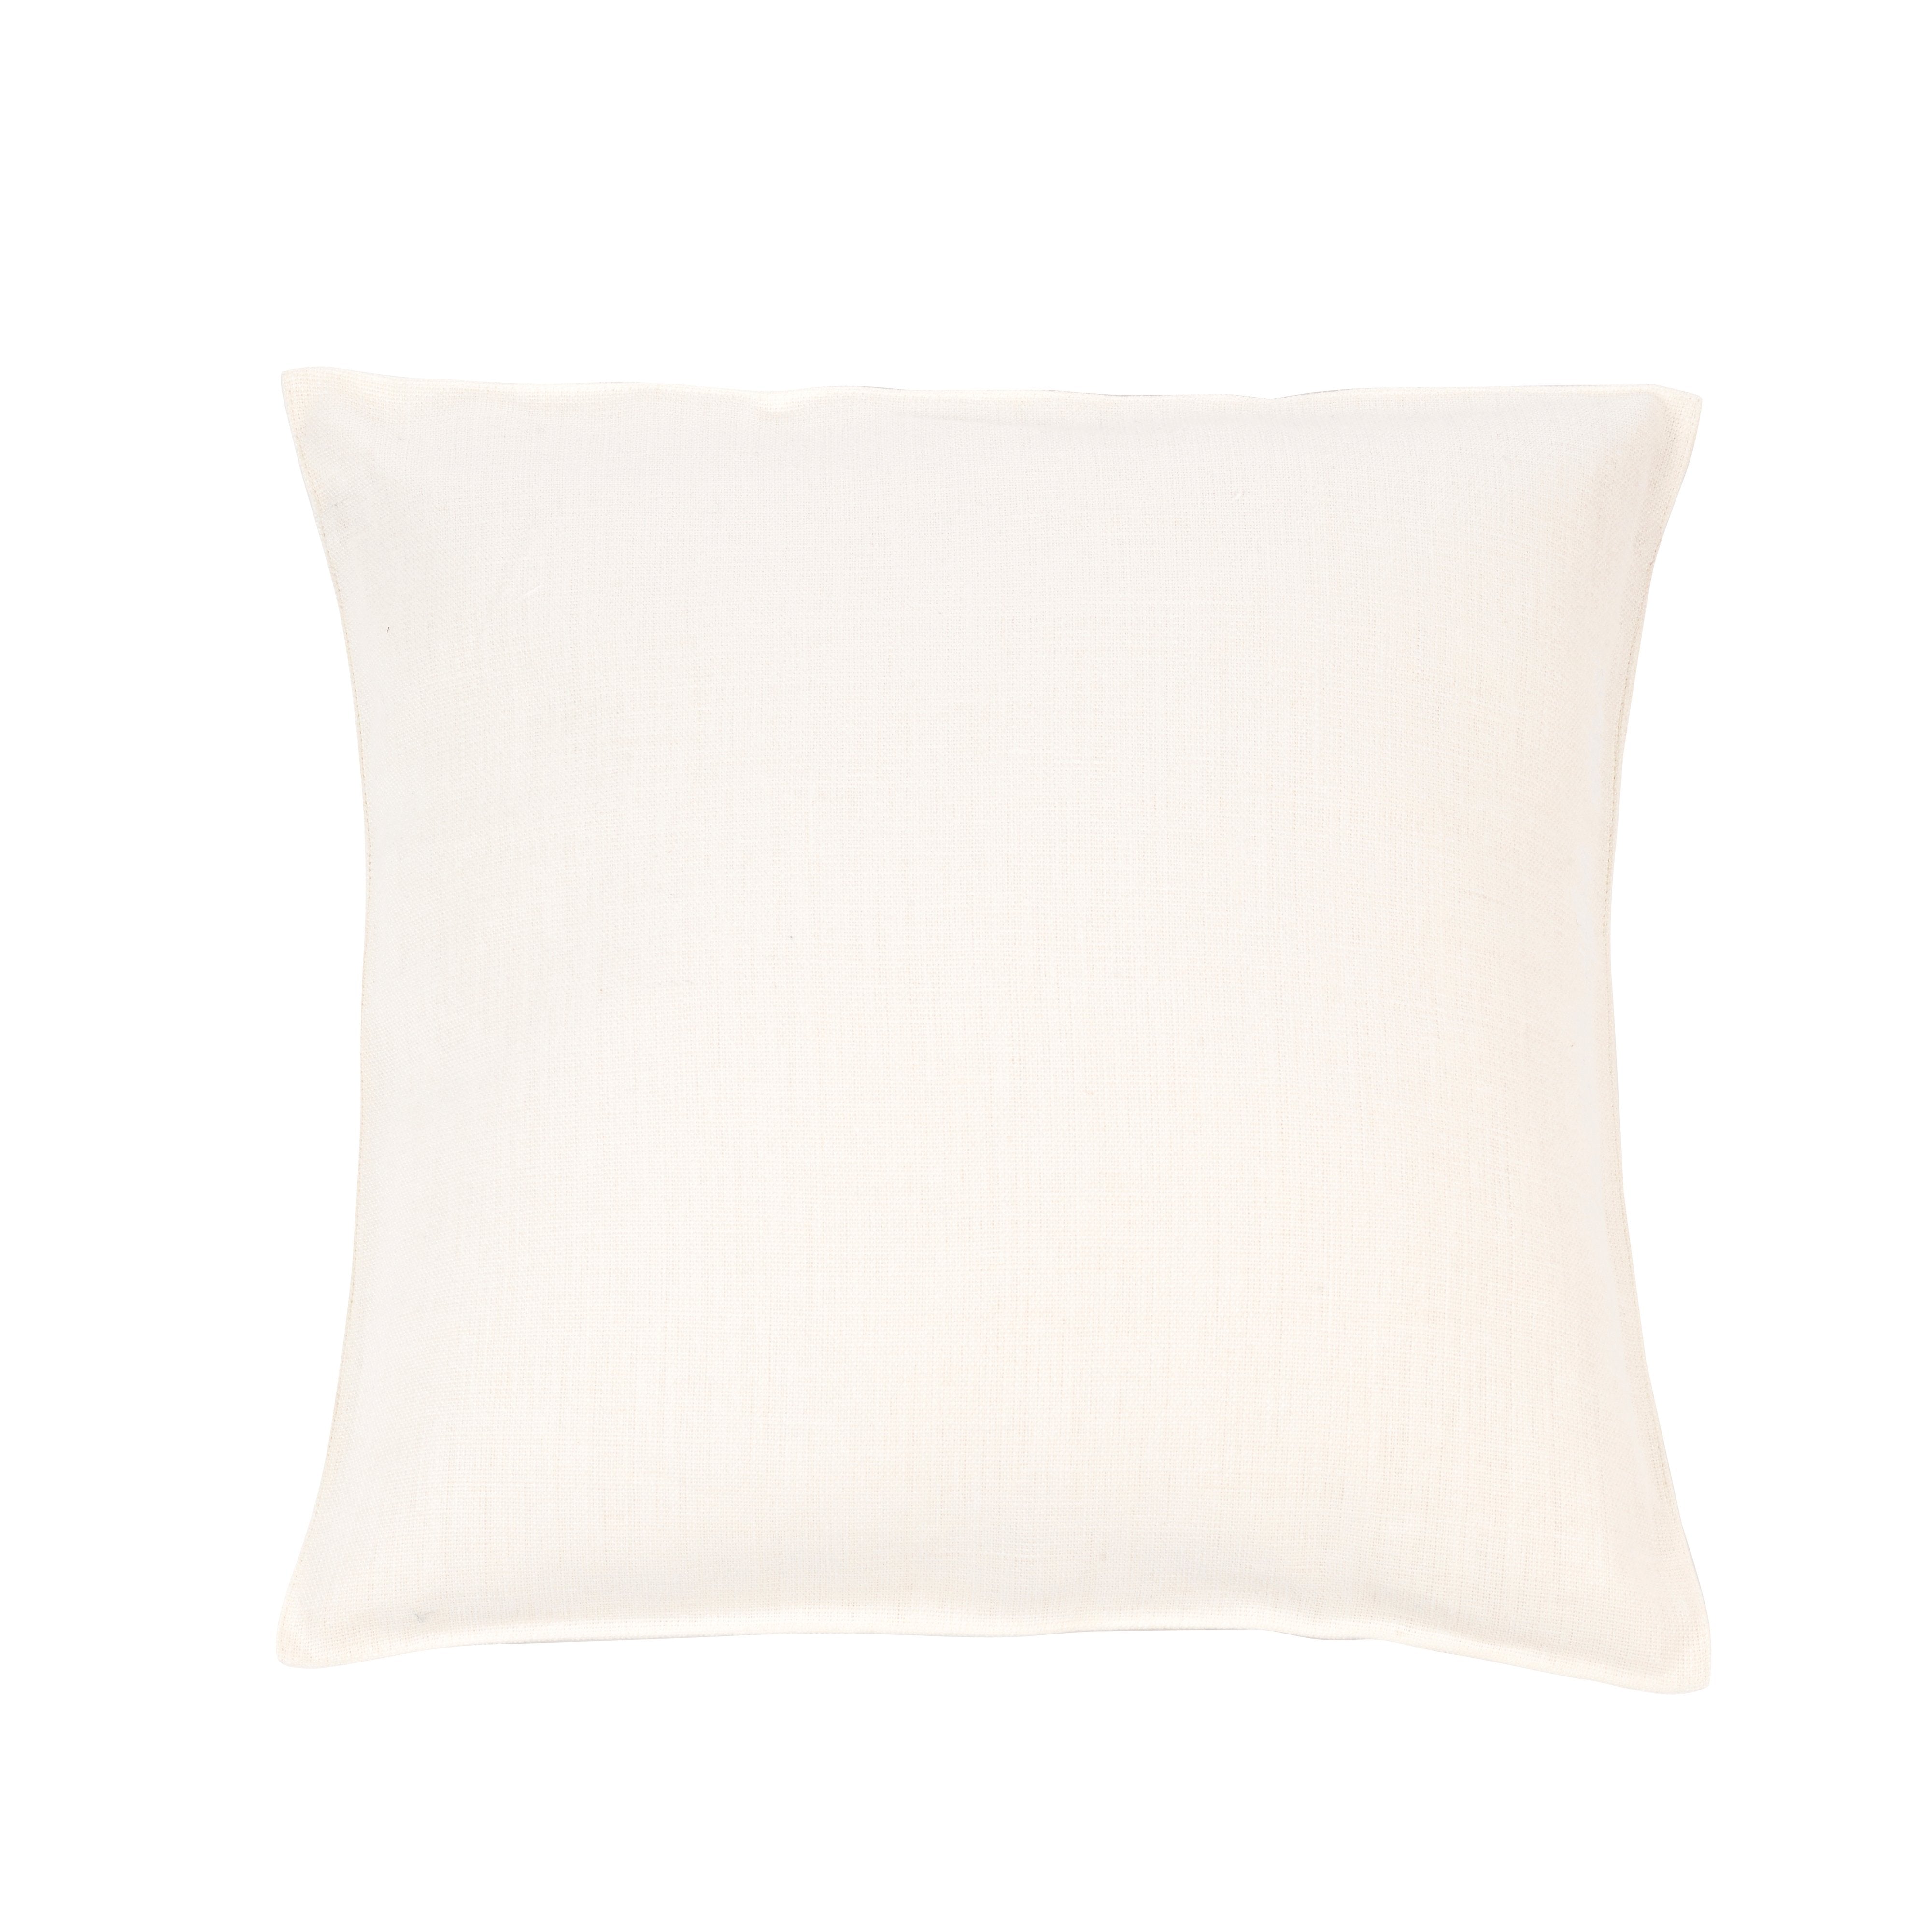 Napoli Pillow Cover, Oyster